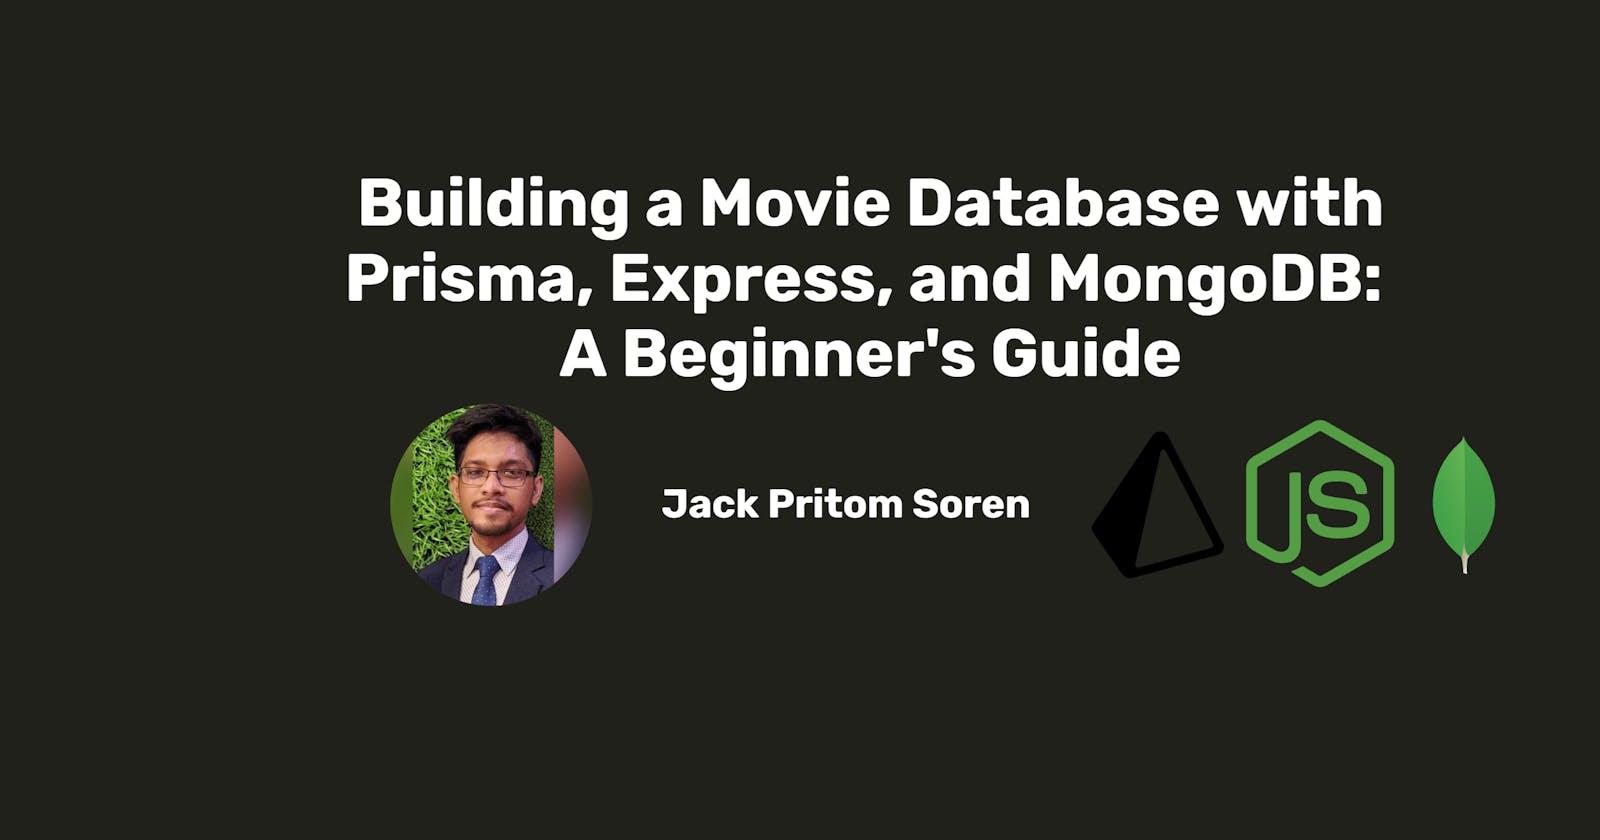 Building a Movie Database with Prisma, Express, and MongoDB: A Beginner's Guide